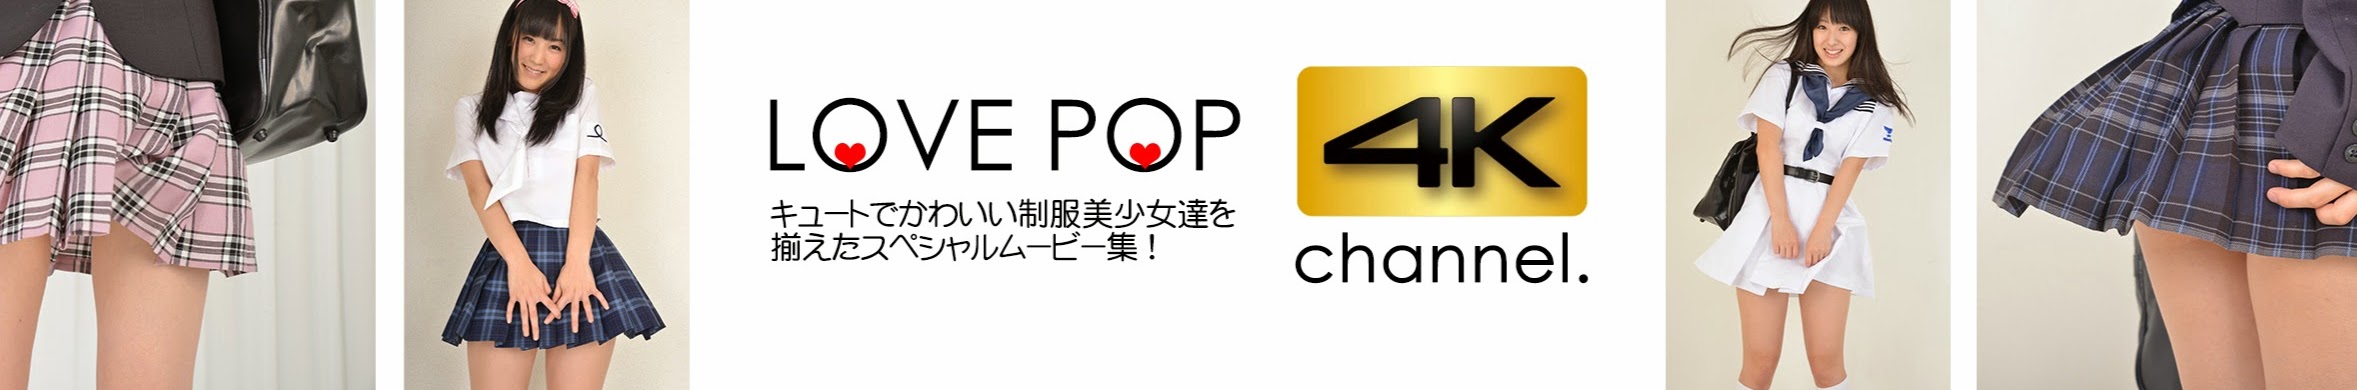 Lovepop ４k動画ちゃんねる Youtube Channel Analytics And Report Powered By Noxinfluencer Mobile